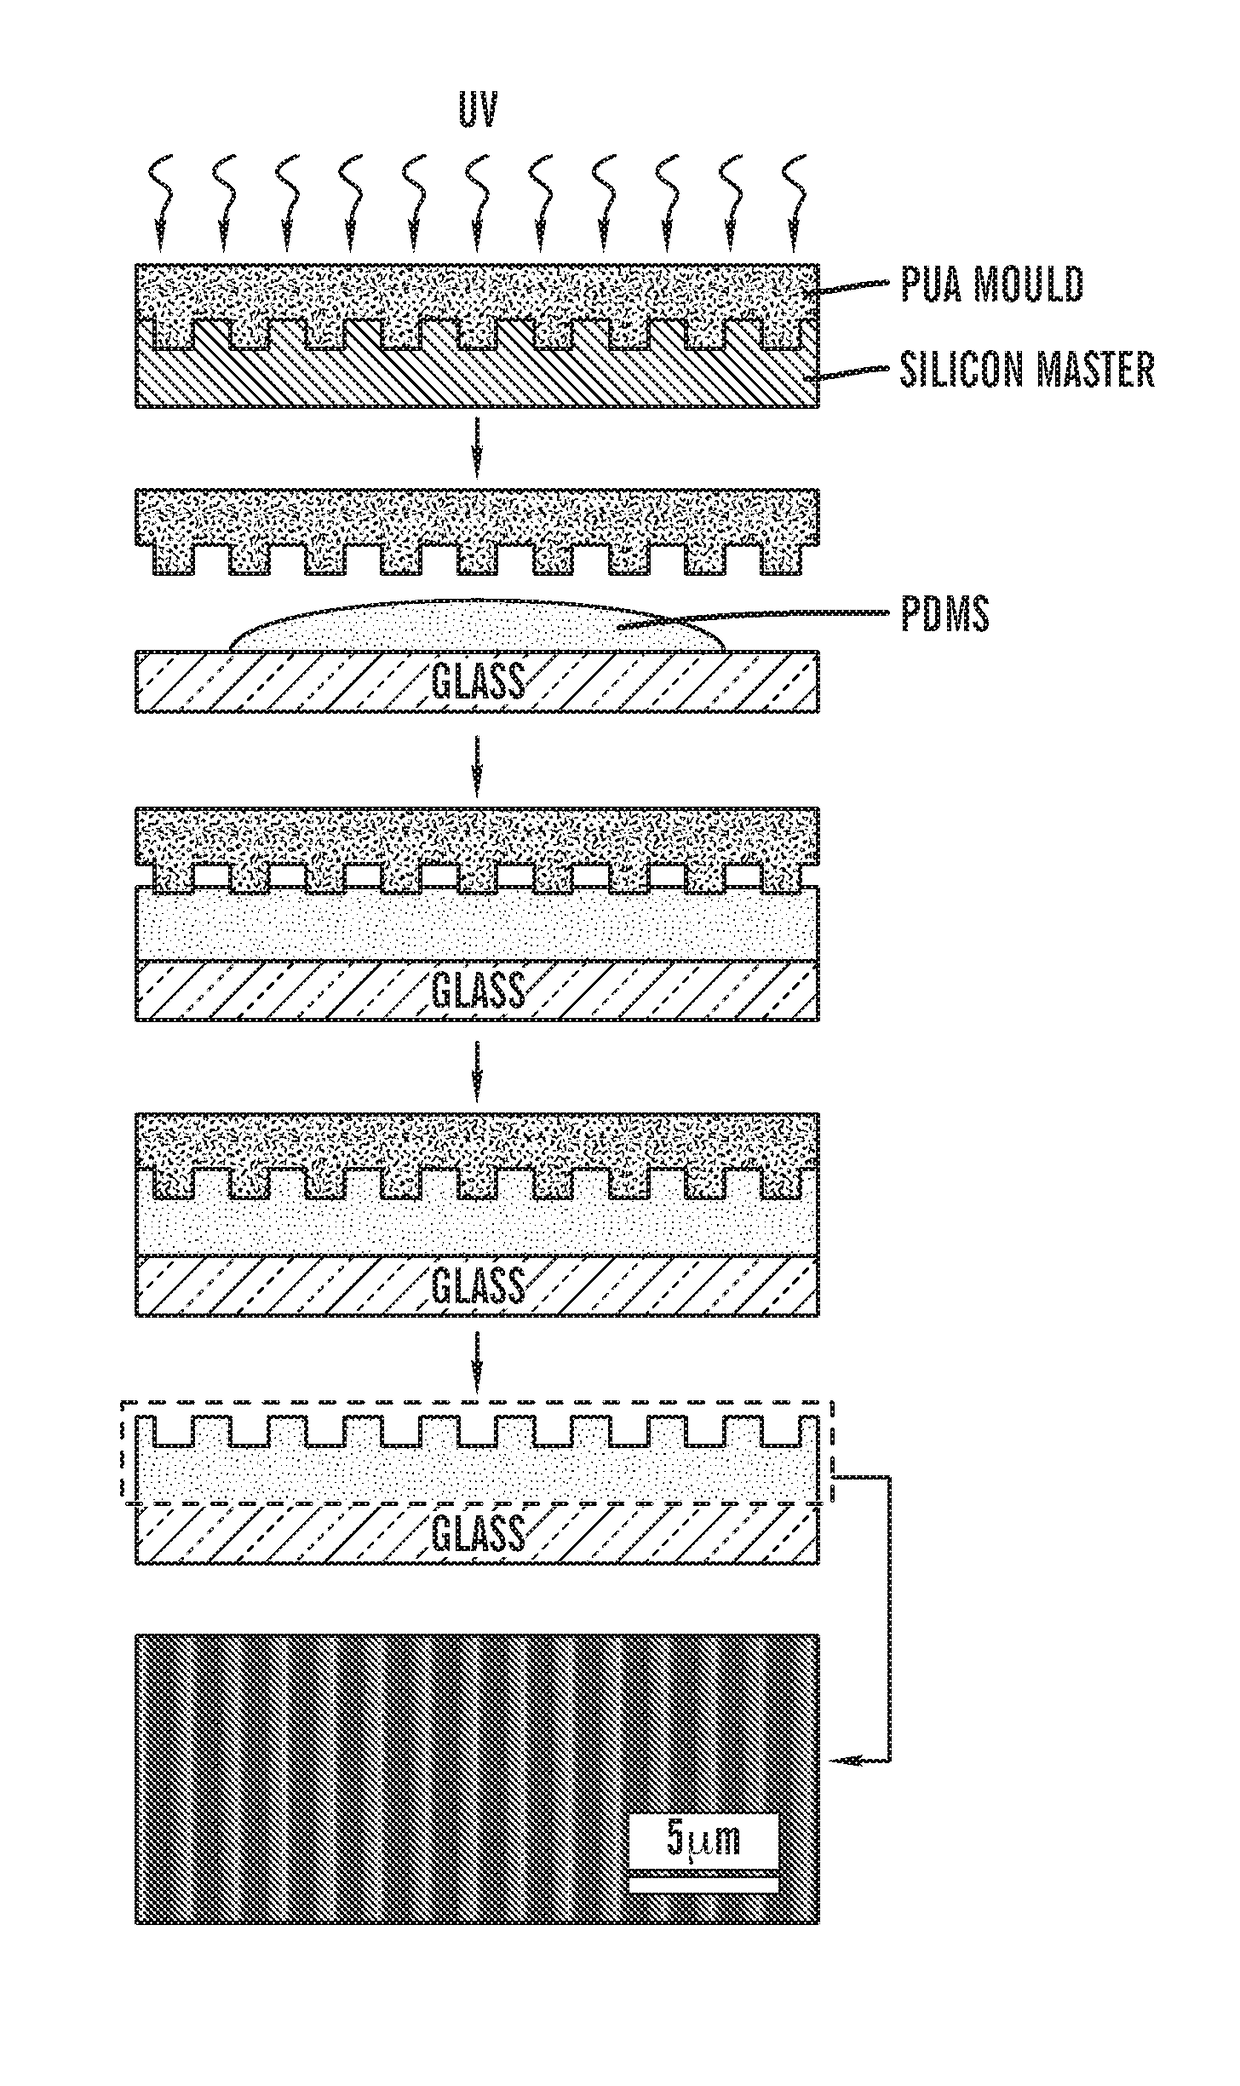 Micro-and nanopatterned substrates for cell migration and uses thereof